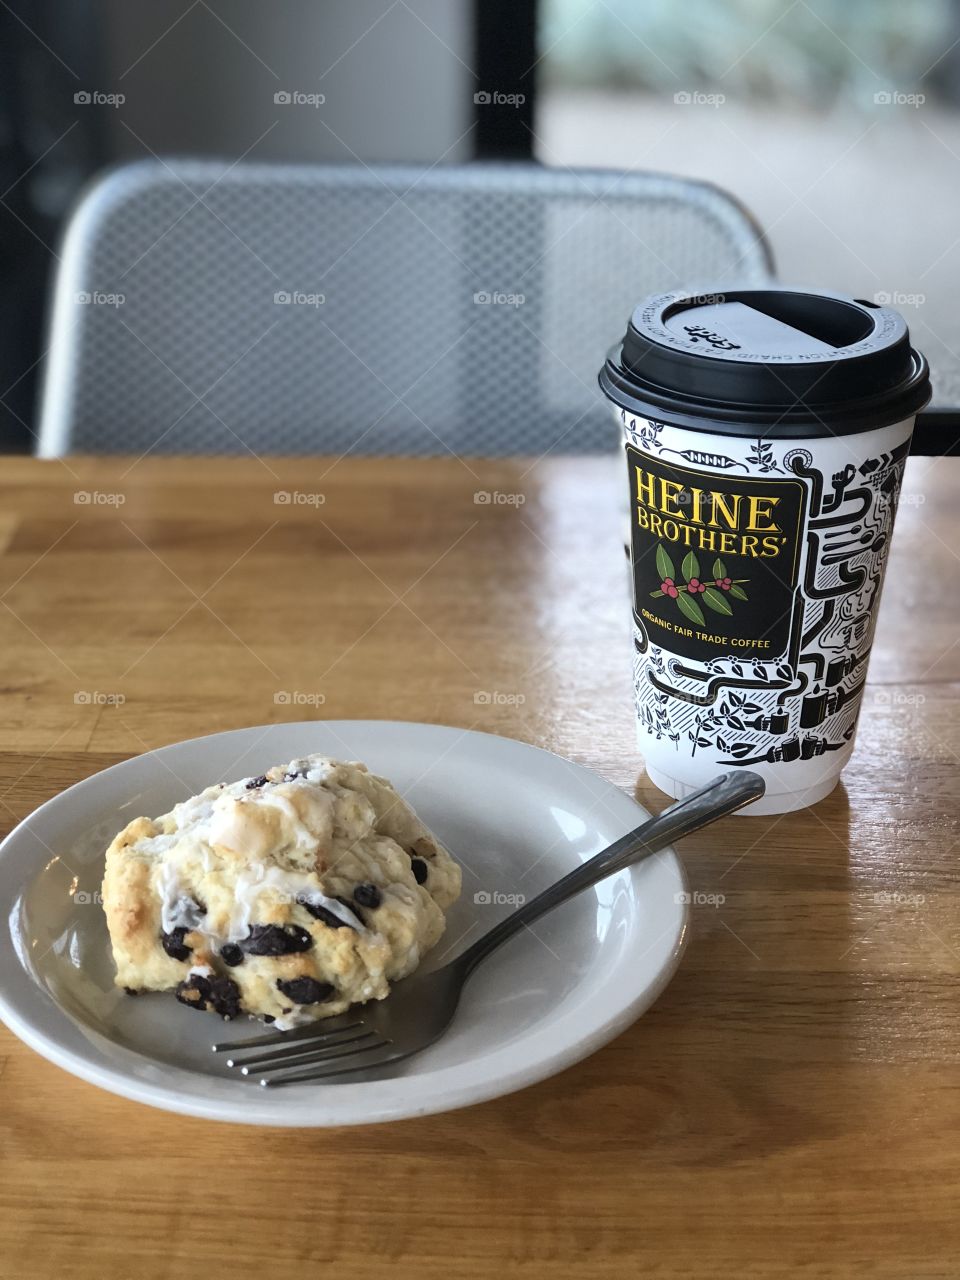 Heine brothers hot chocolate with a chocolate chip scone - what better way to start a morning?